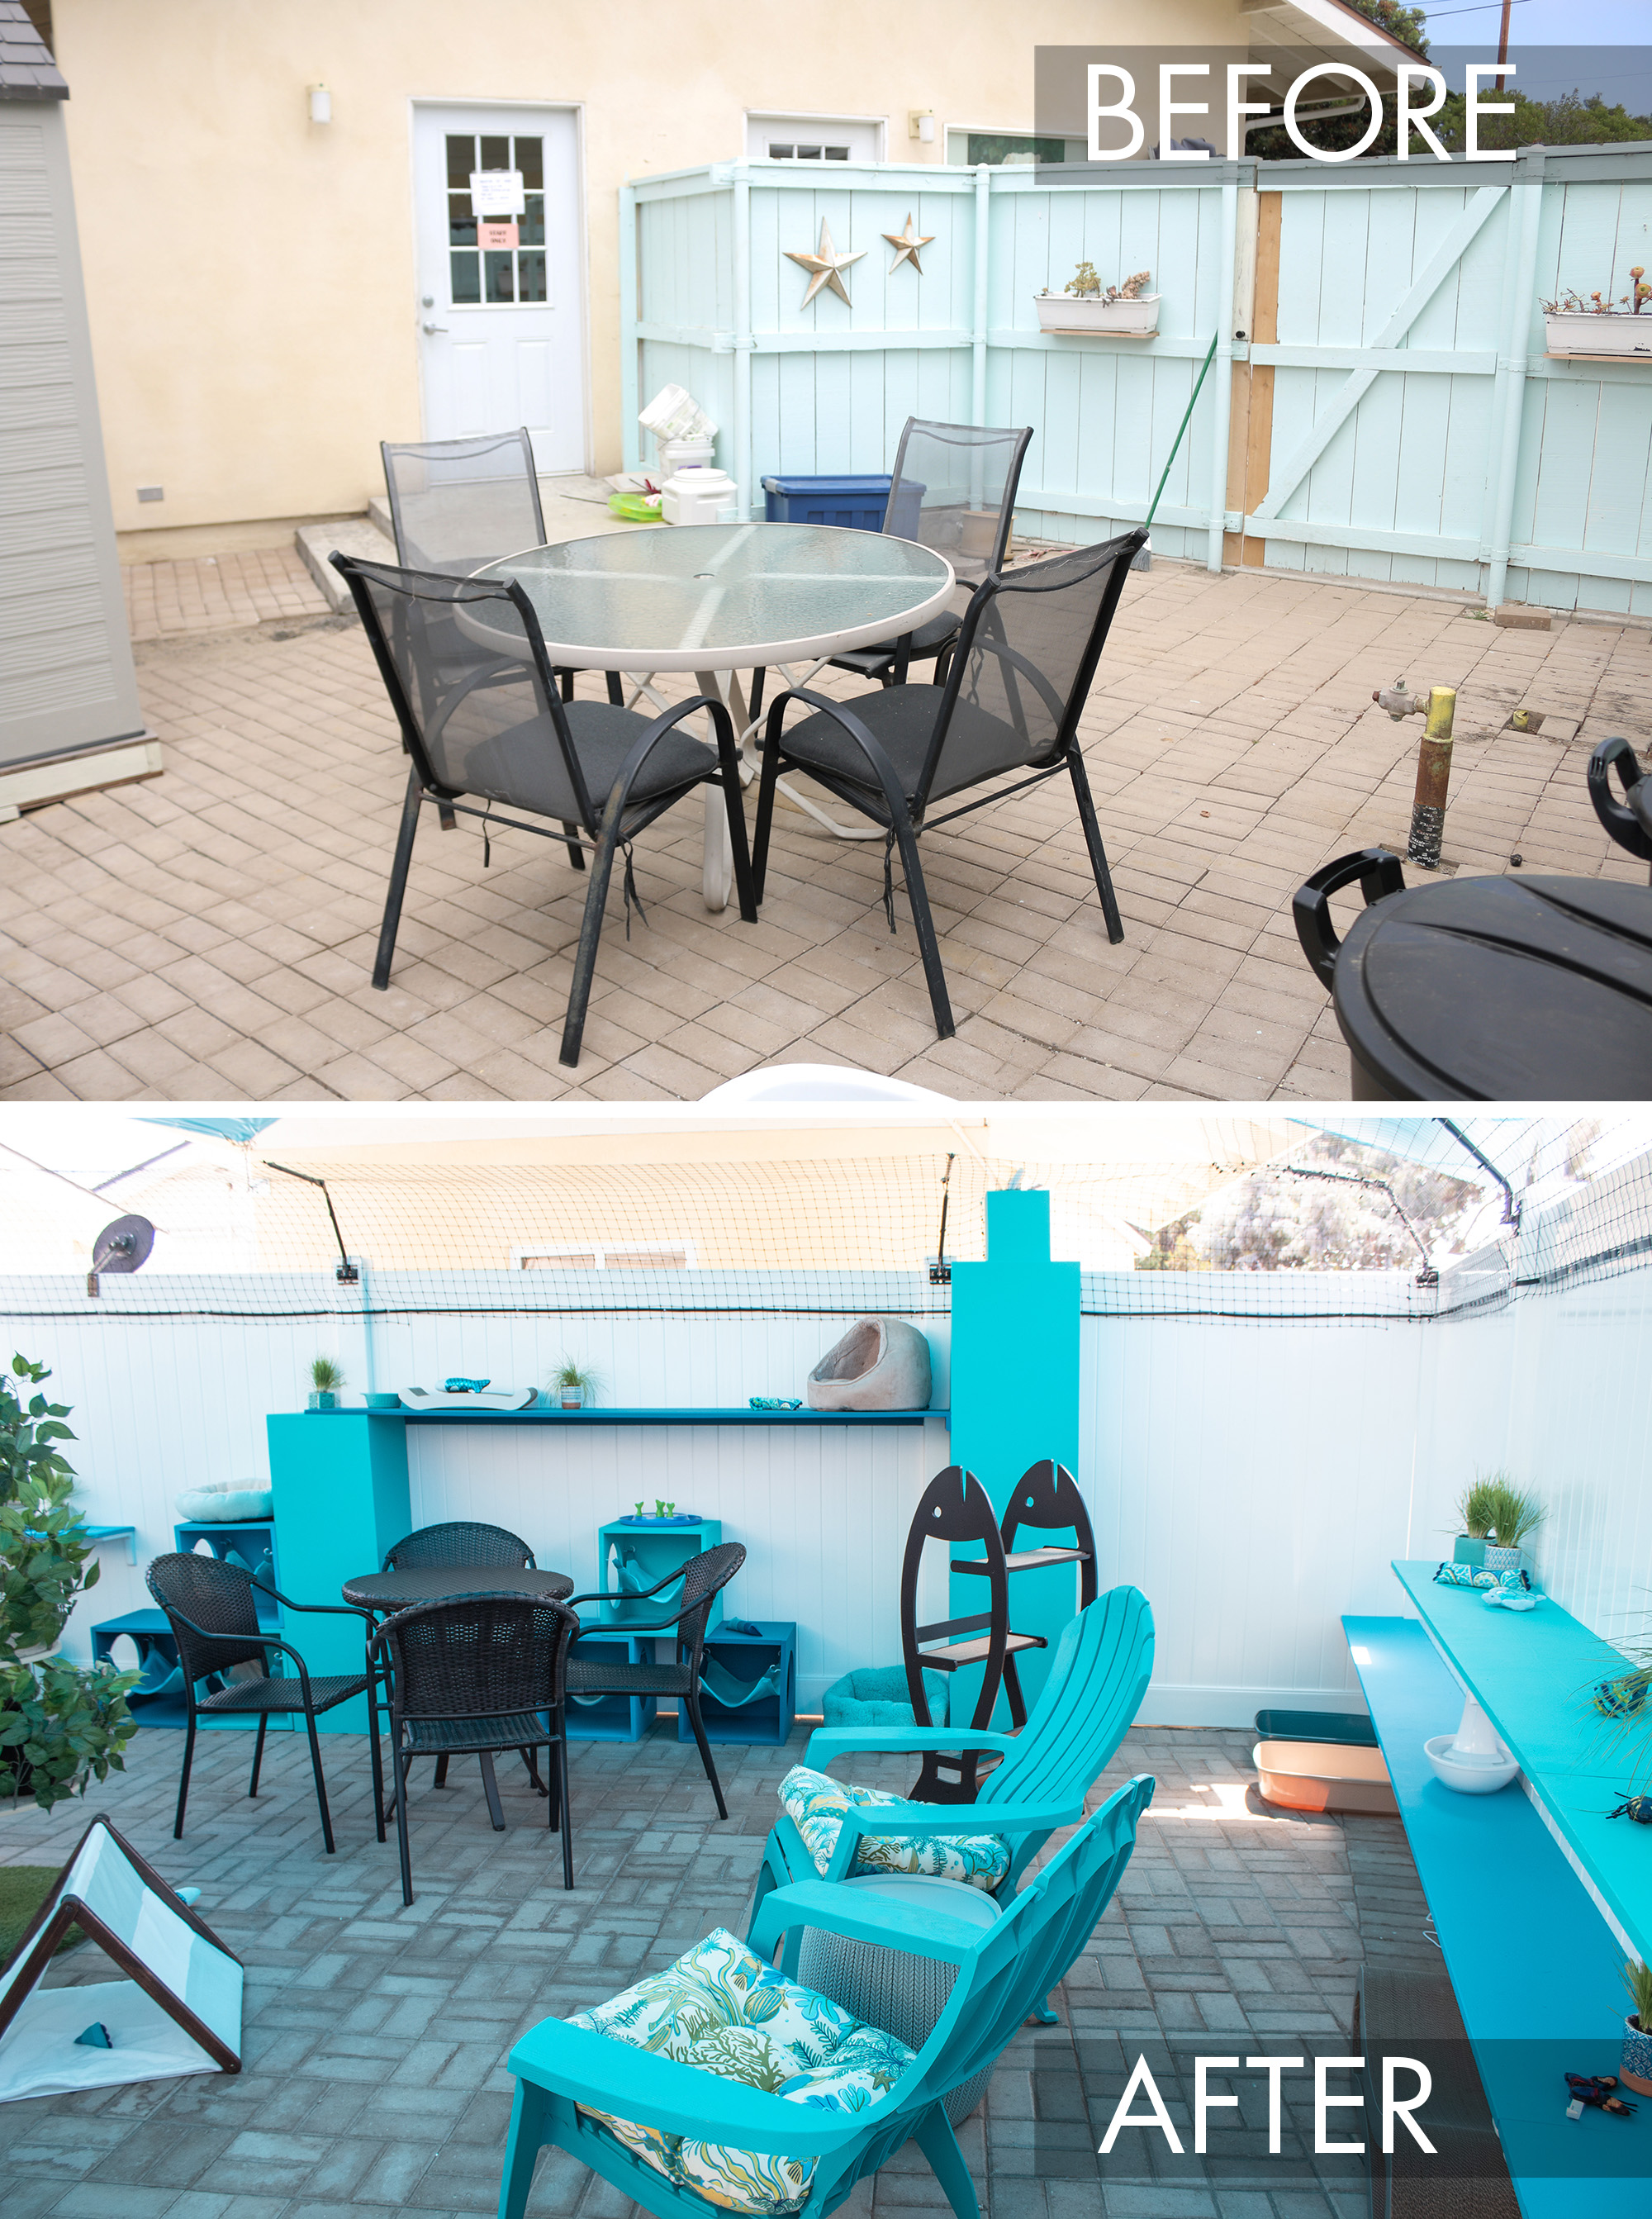 Before and After at the Rancho Coastal Catio Cafe